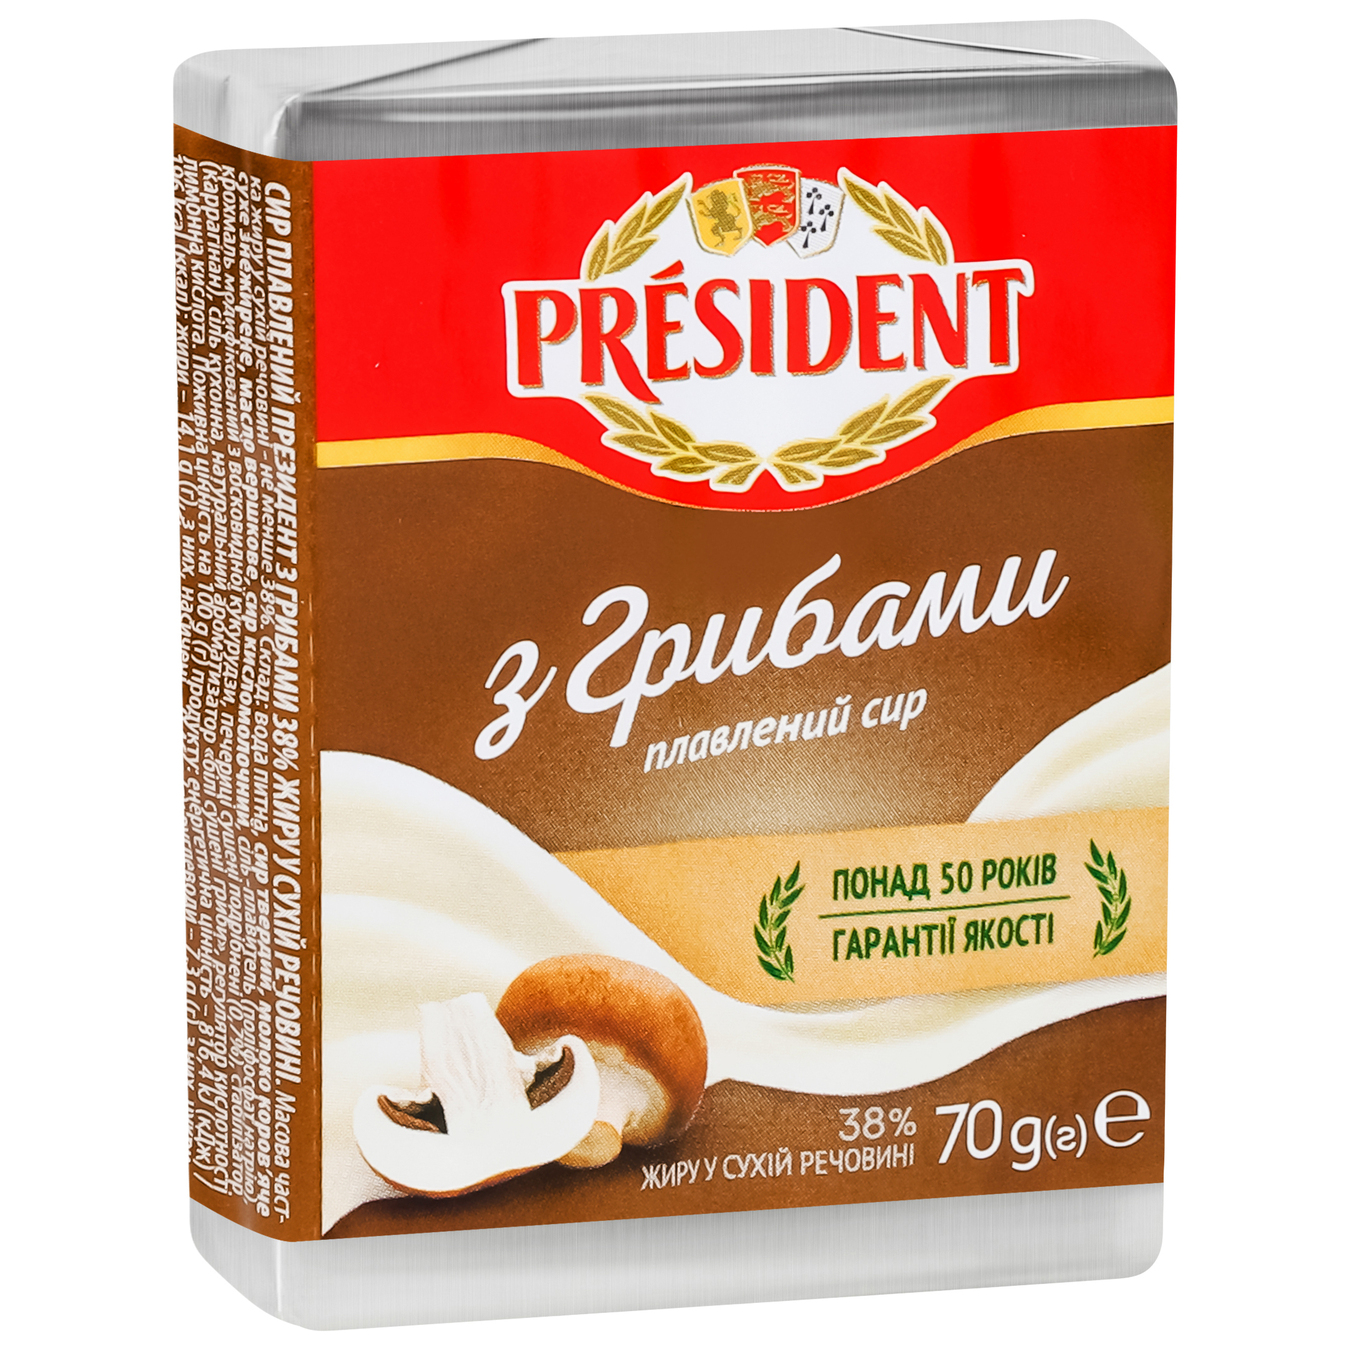 Processed cheese President With mushrooms 38% 70g 8